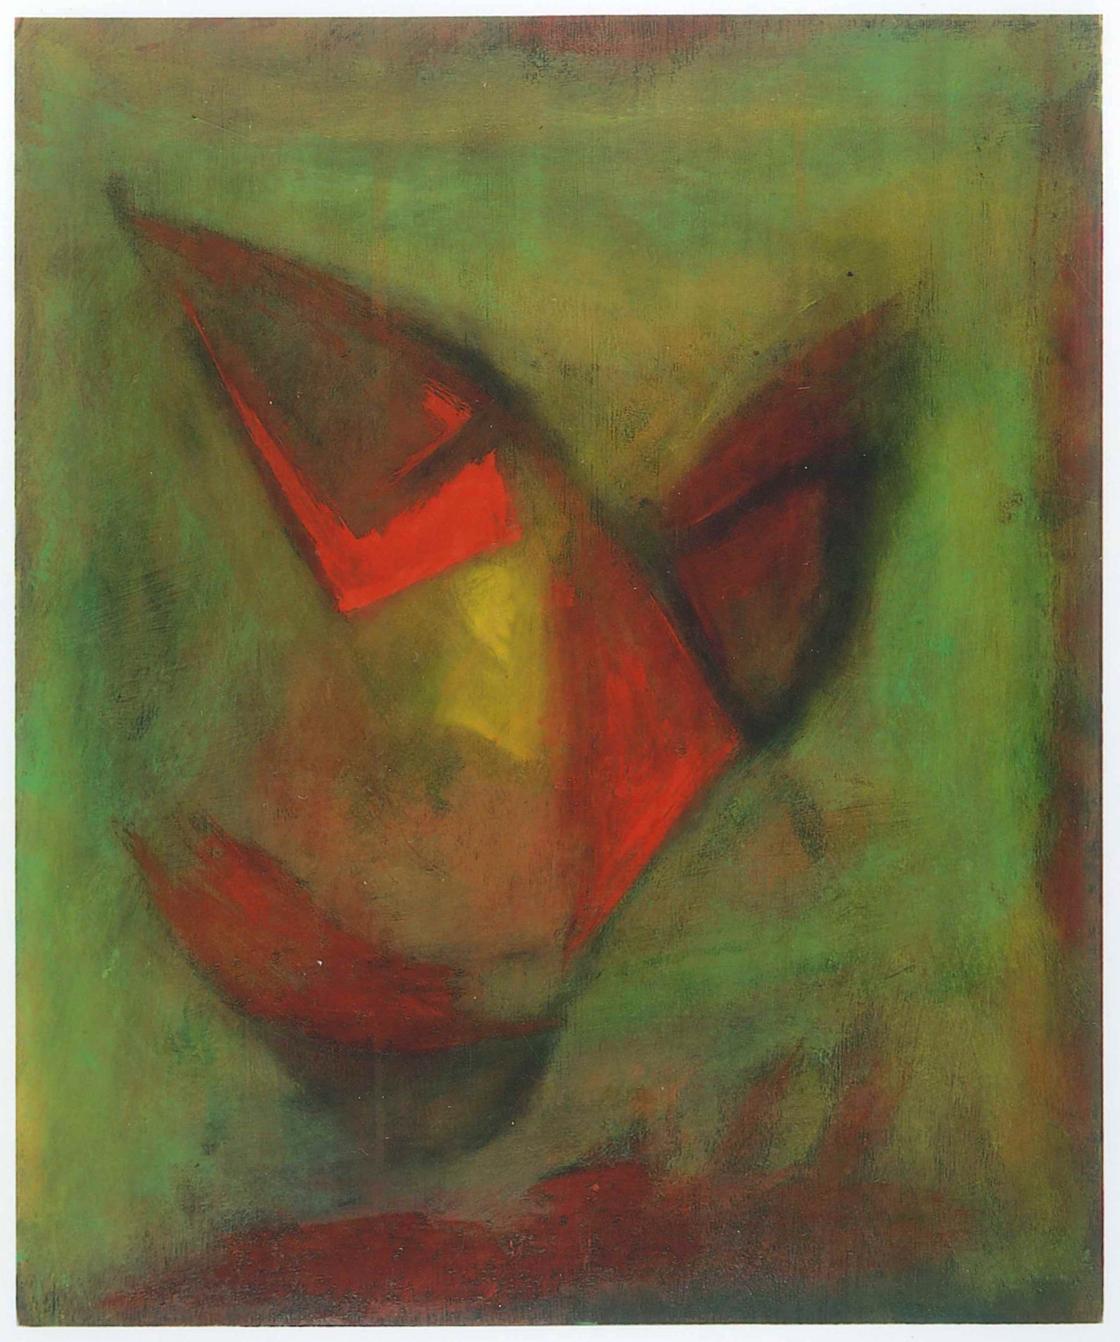 Informal Painting is an original artwork realized by Giorgio Lo Fermo in 2014.

Oil on canvas. 

This contemporary artwork was realized in 2014 and represents an abstract composition: on a green background the red and brown colors alternate with